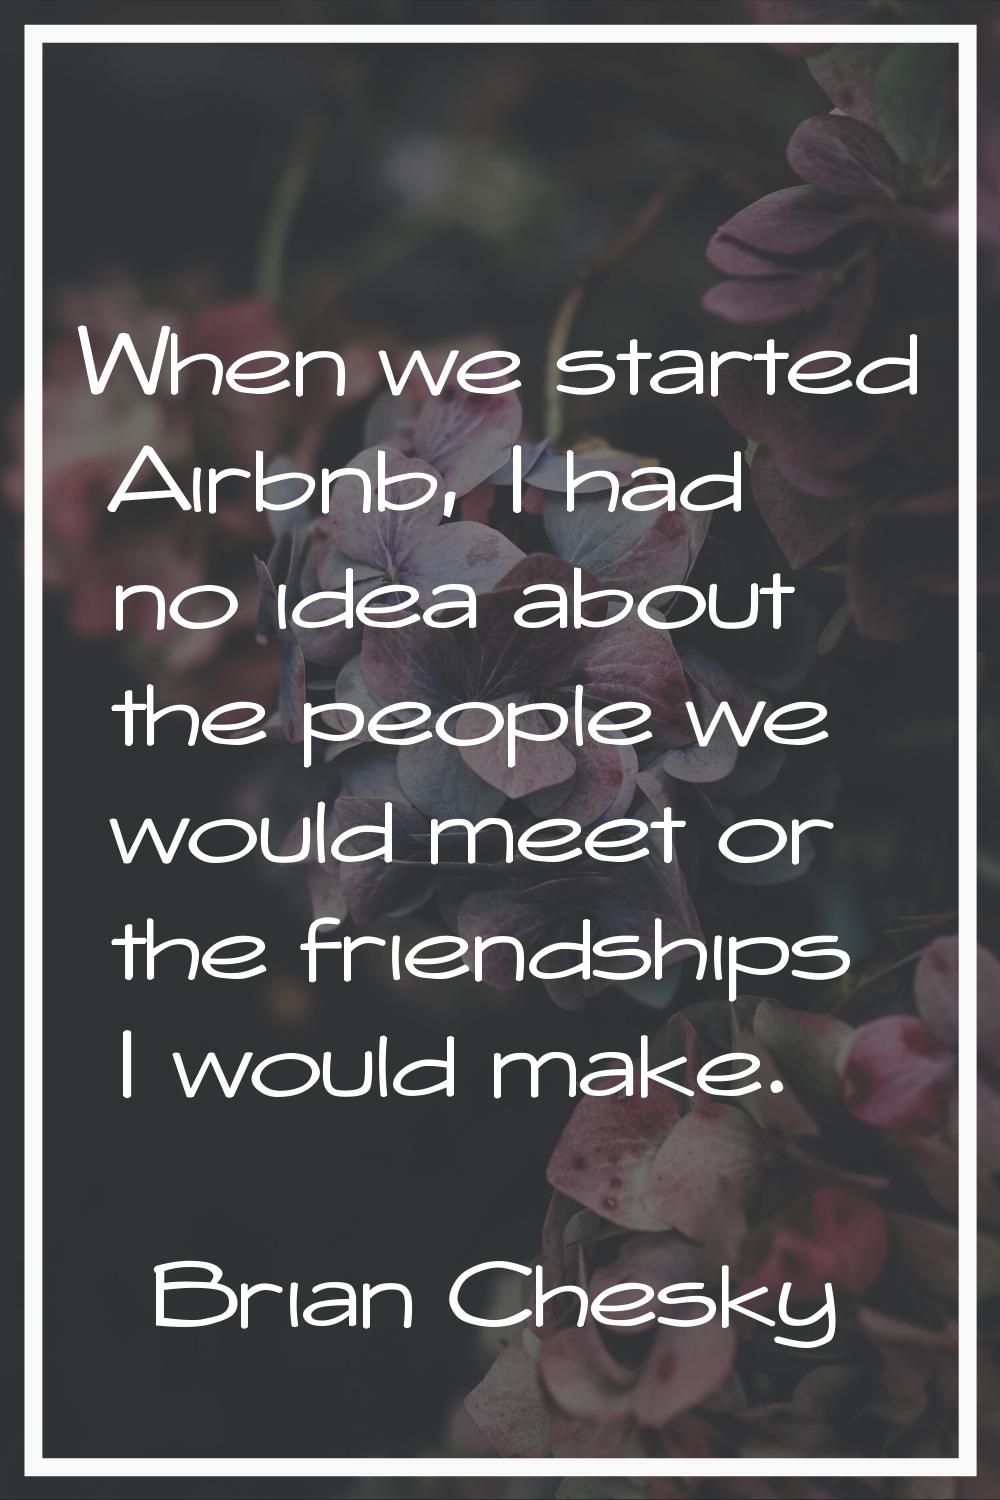 When we started Airbnb, I had no idea about the people we would meet or the friendships I would mak